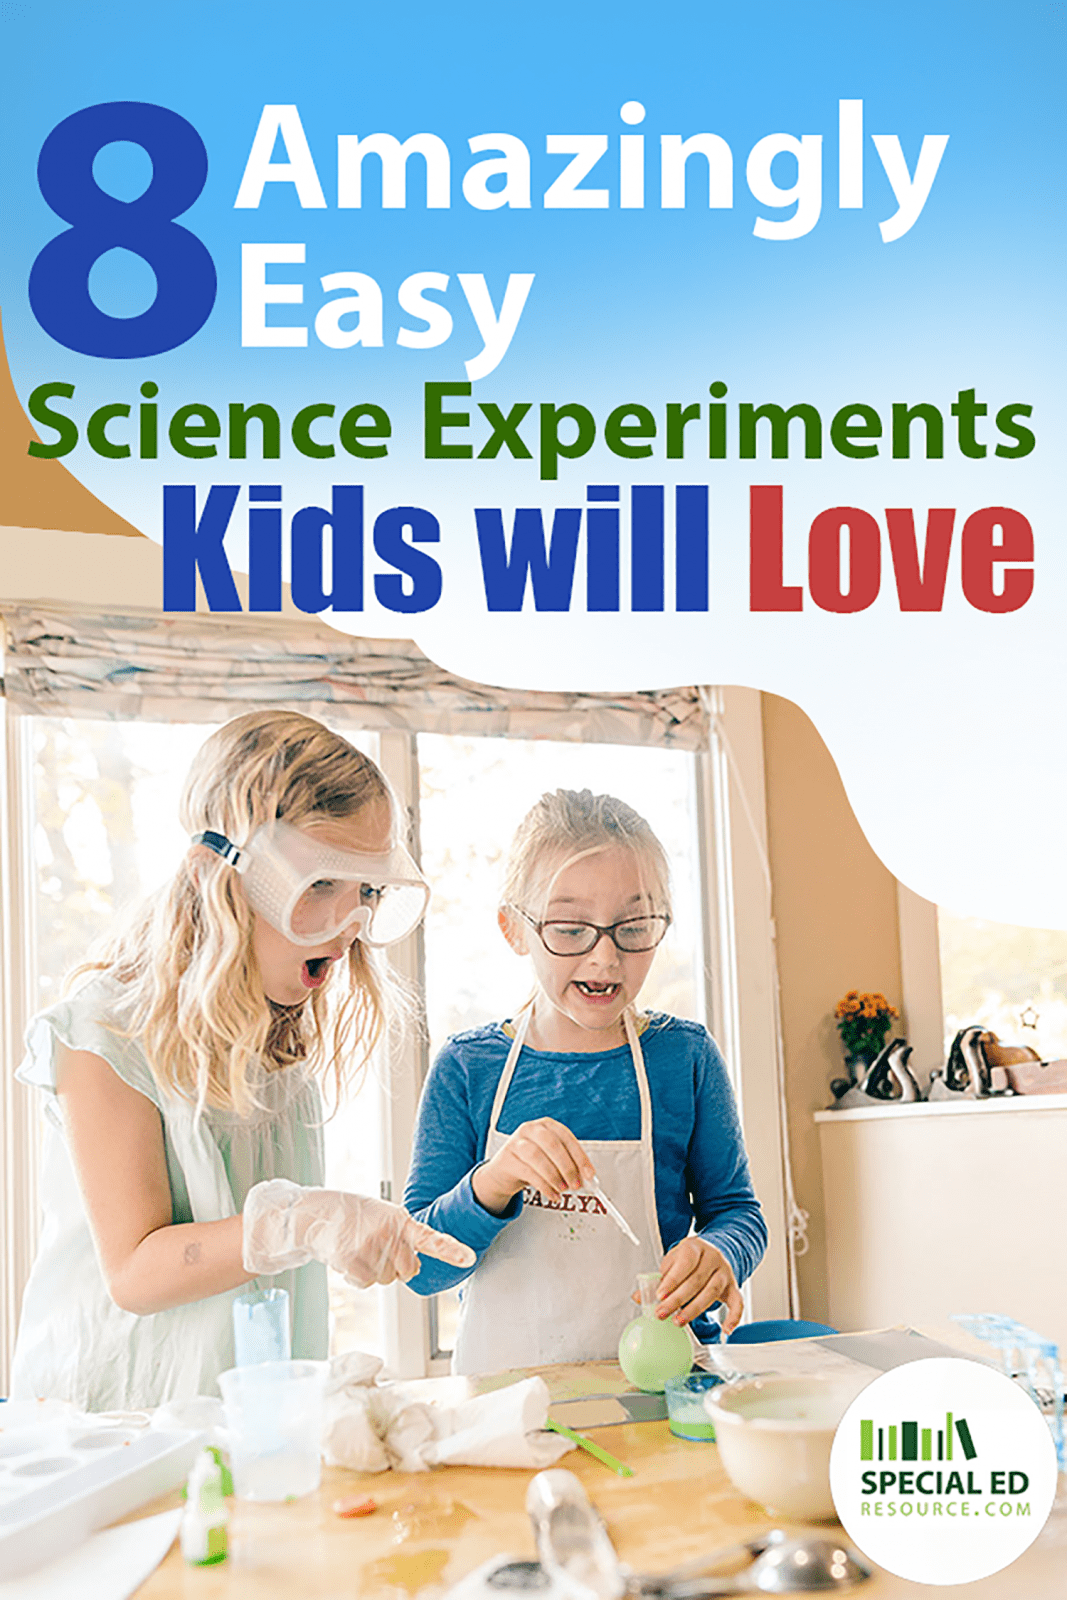 8 Amazingly Easy Science Experiments Kids will Love